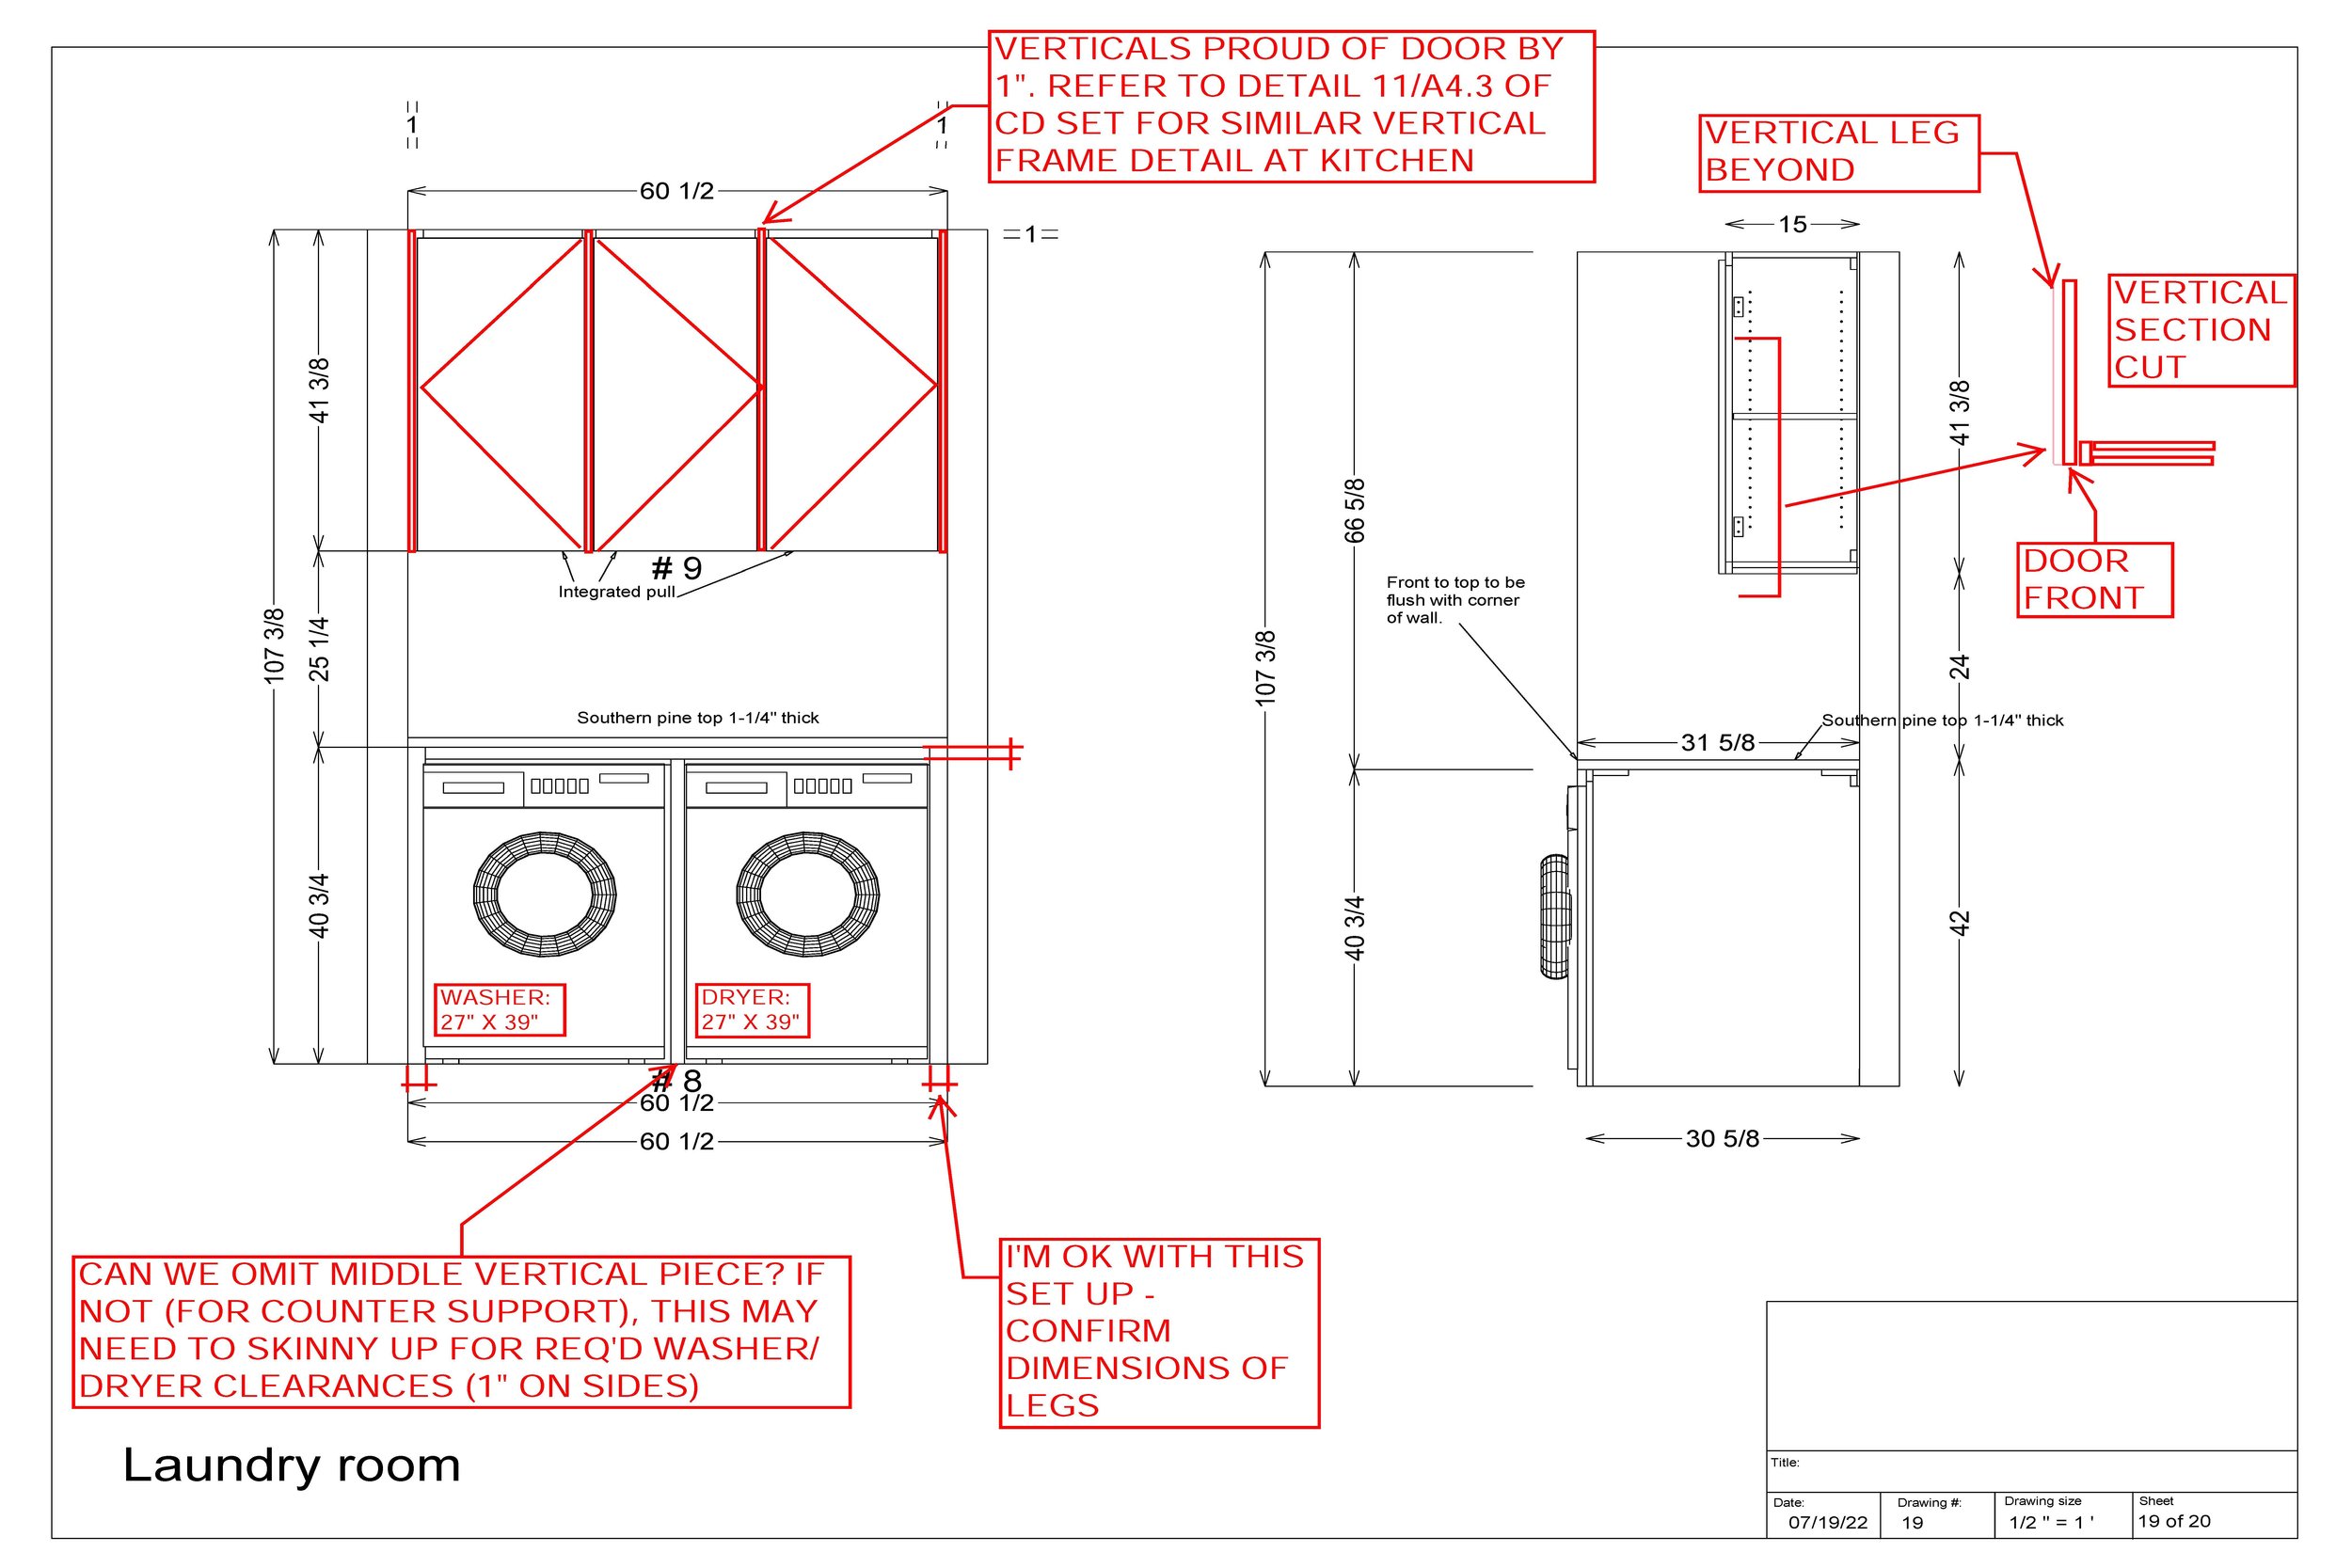 2022 09 12_COMBINED MILLWORK SHOP DRAWINGSt_Page_21.jpg